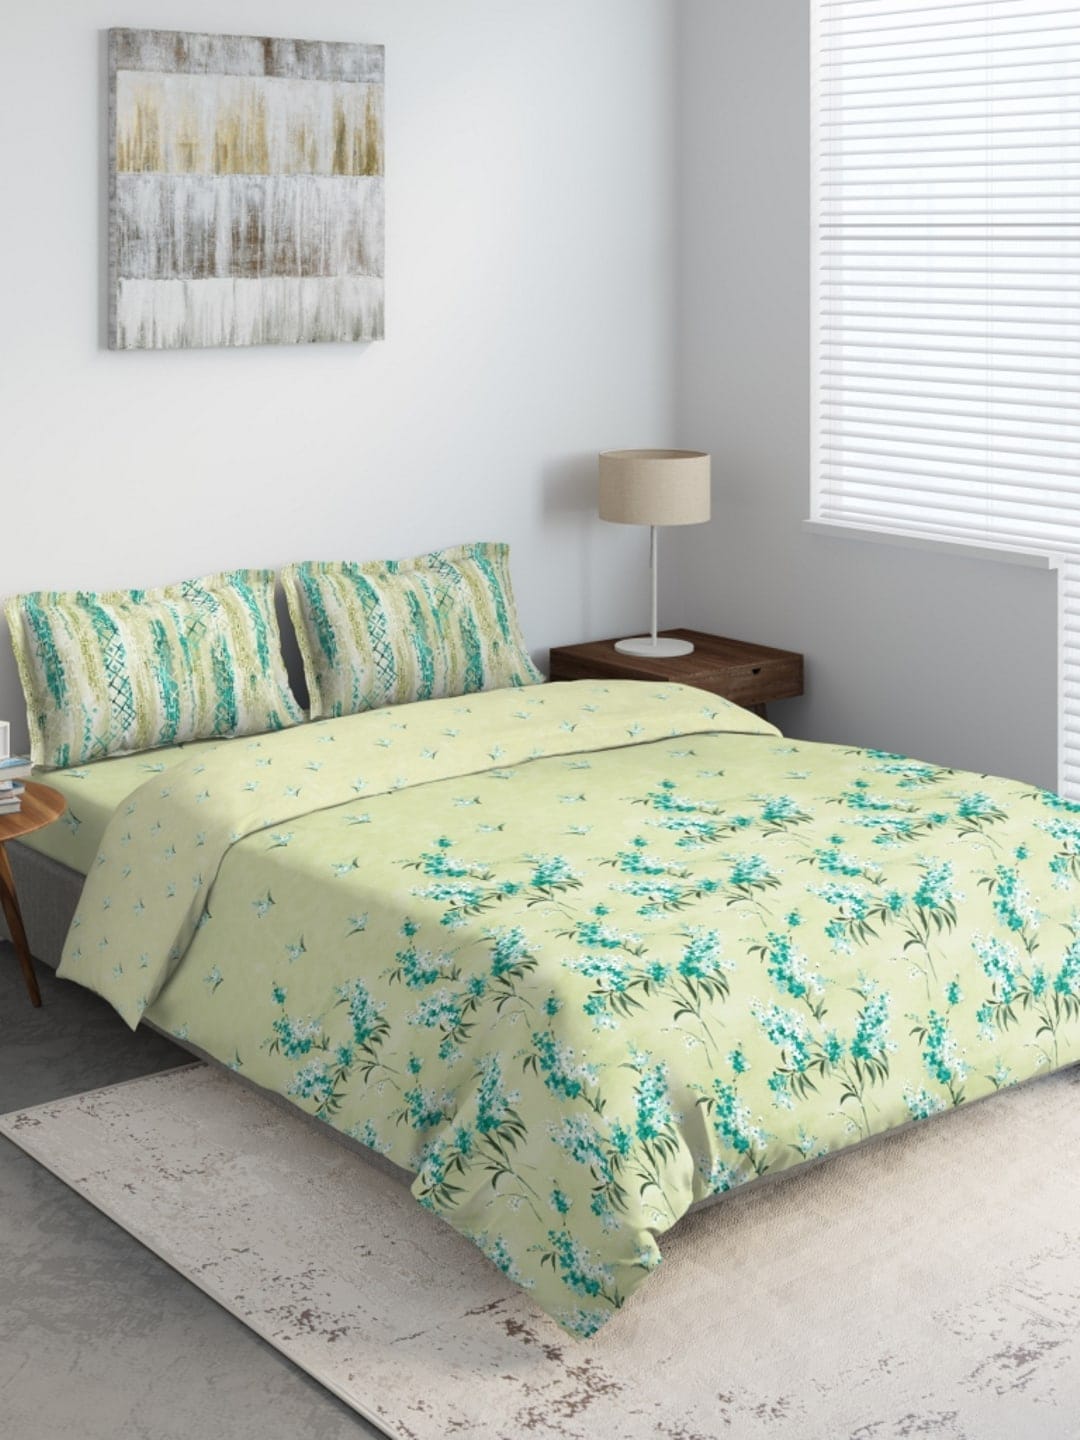 DDecor Turquoise Blue & Green Printed Double Queen Cotton Bedding Set Price in India